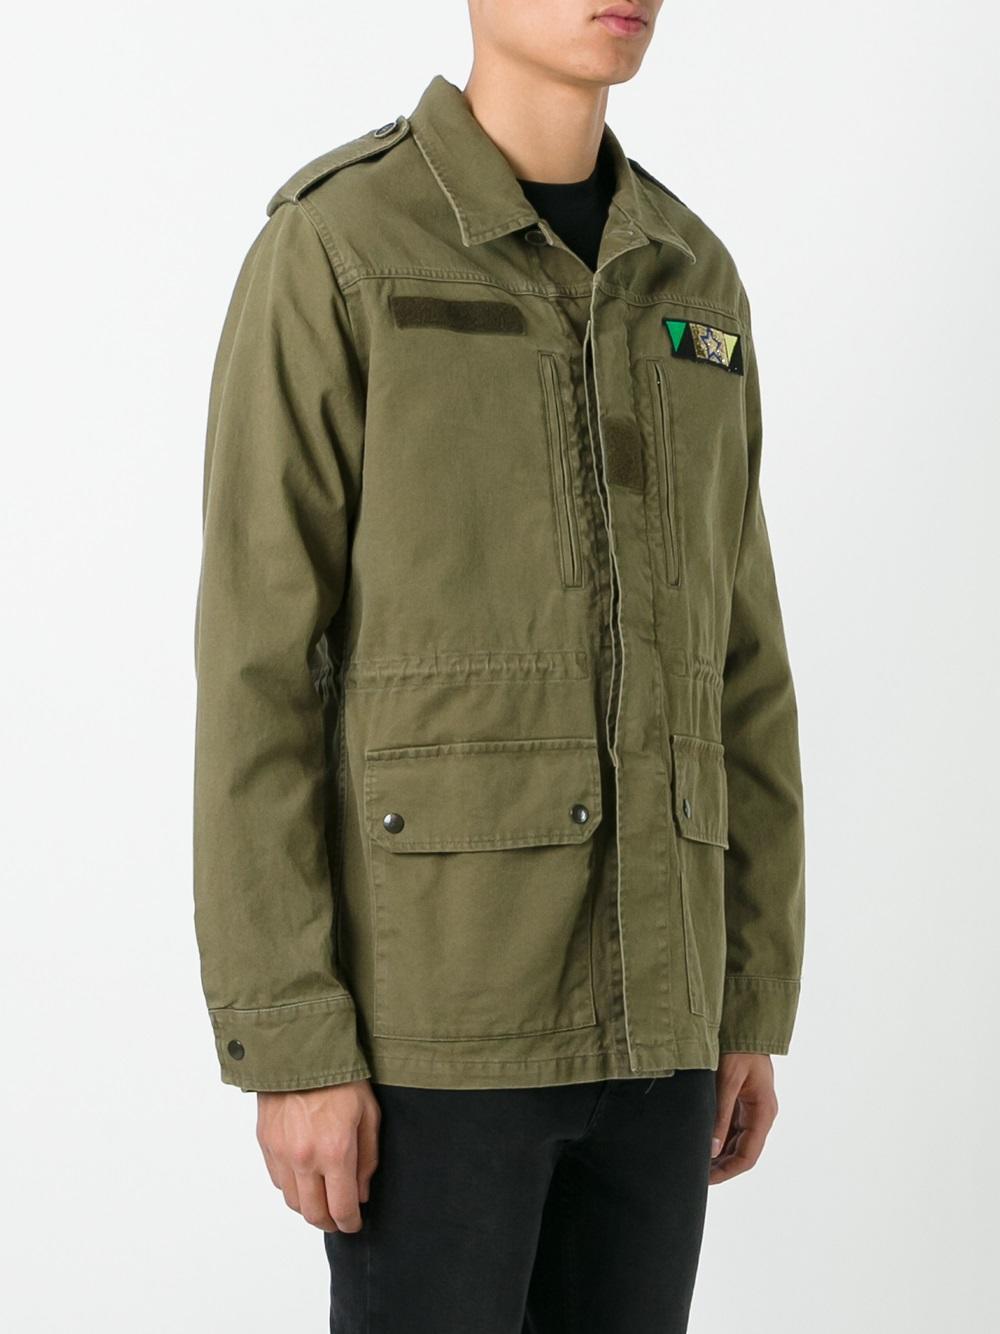 Saint Laurent Sweet Dreams Shark Patch Military Jacket in Green for Men ...